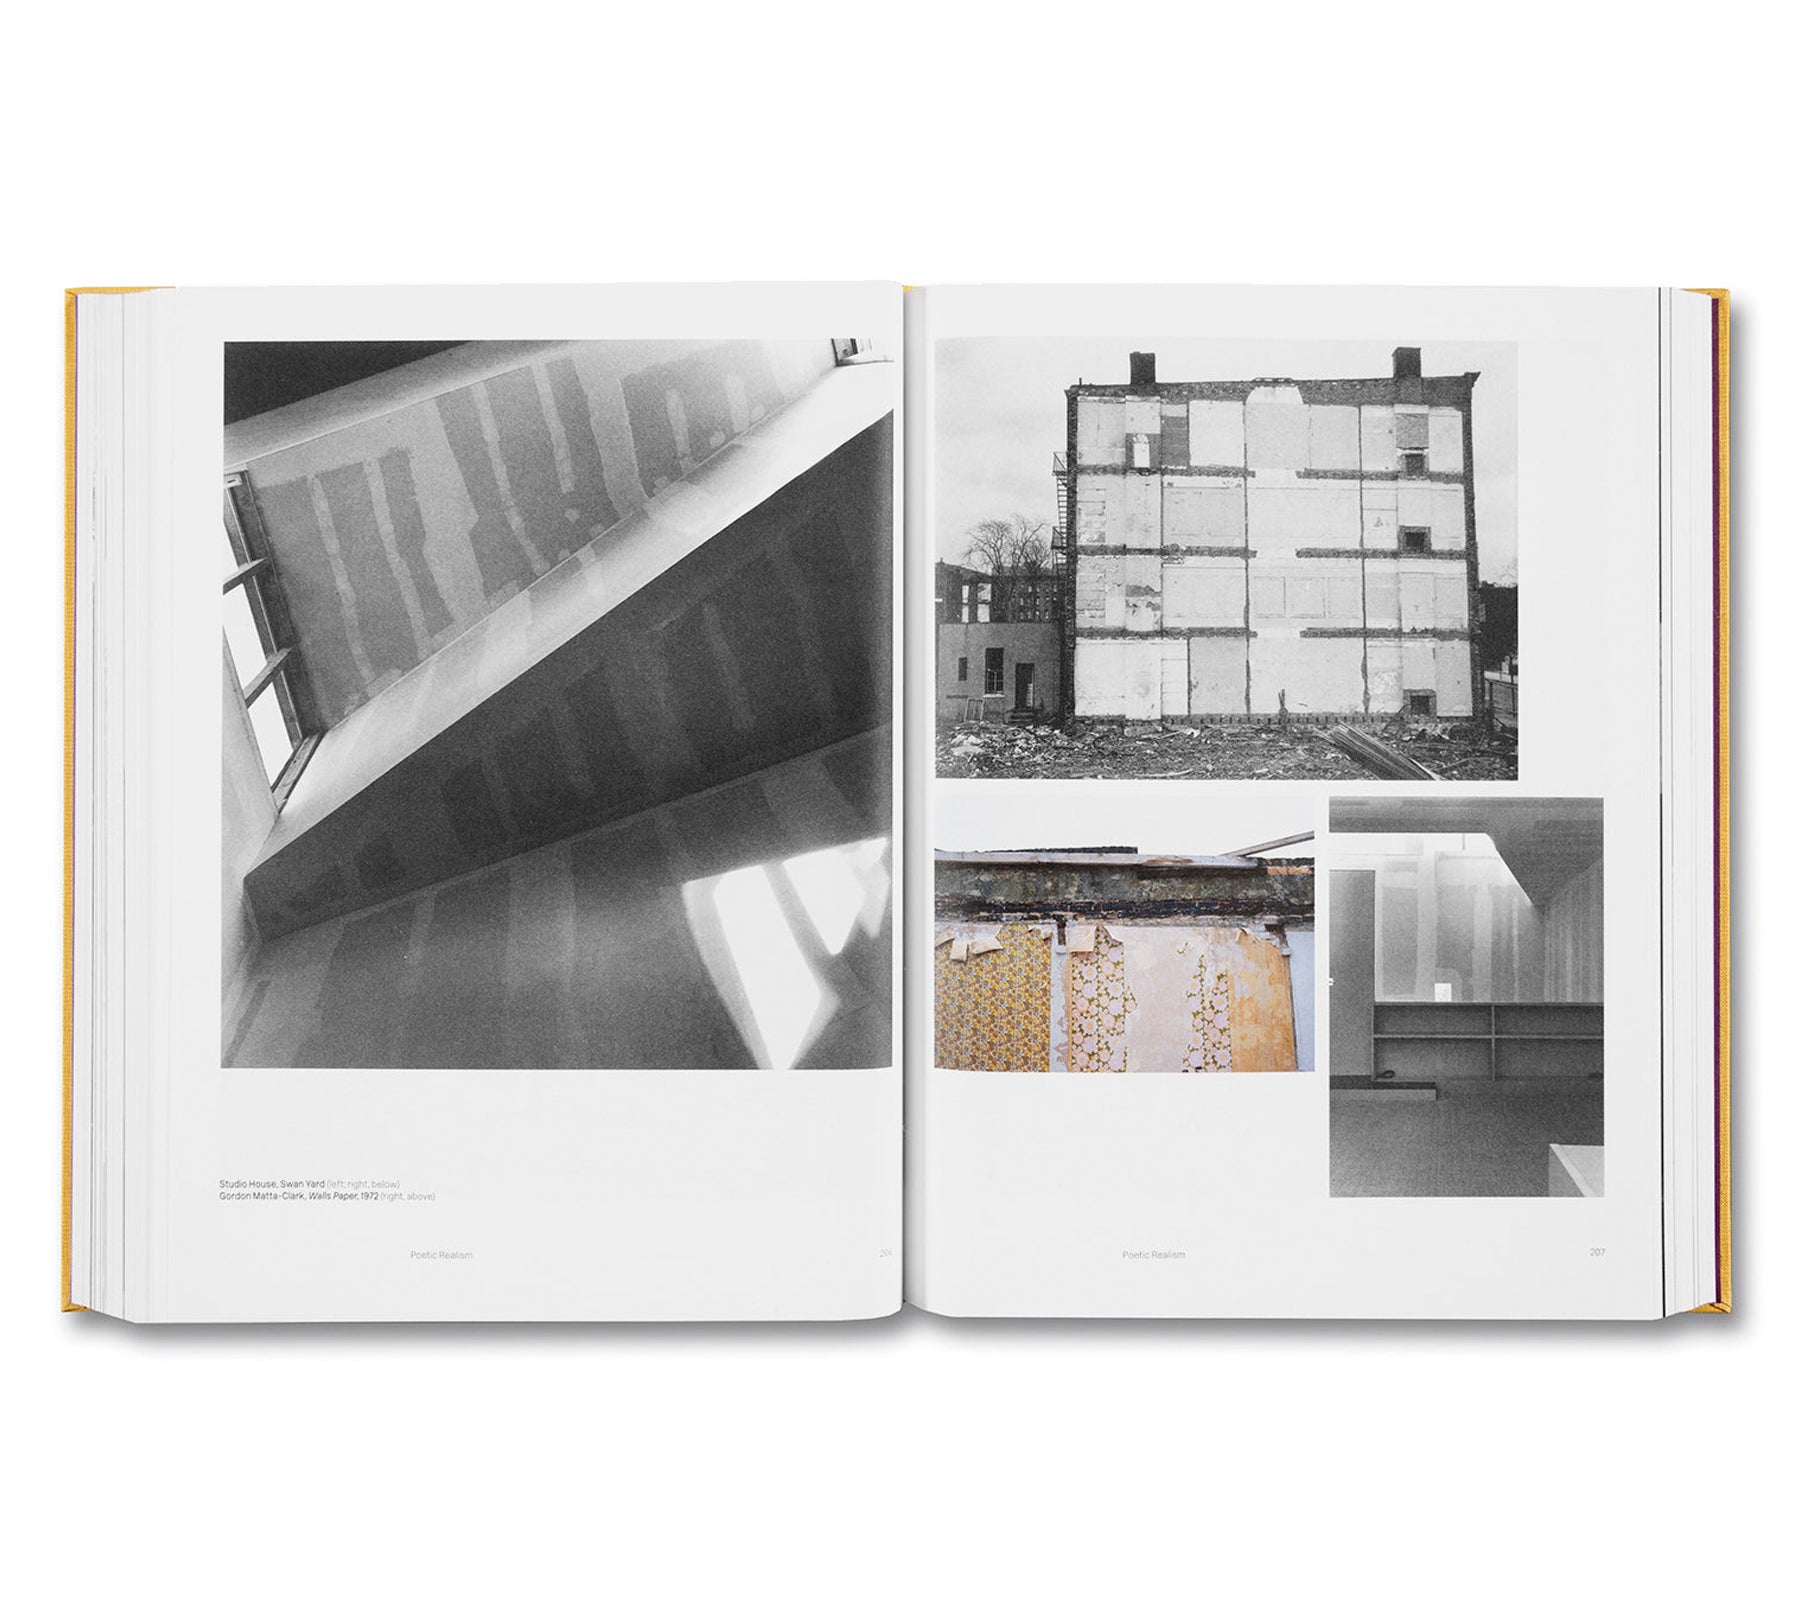 COLLECTED WORKS: VOLUME 1 1990-2005 by Caruso St John